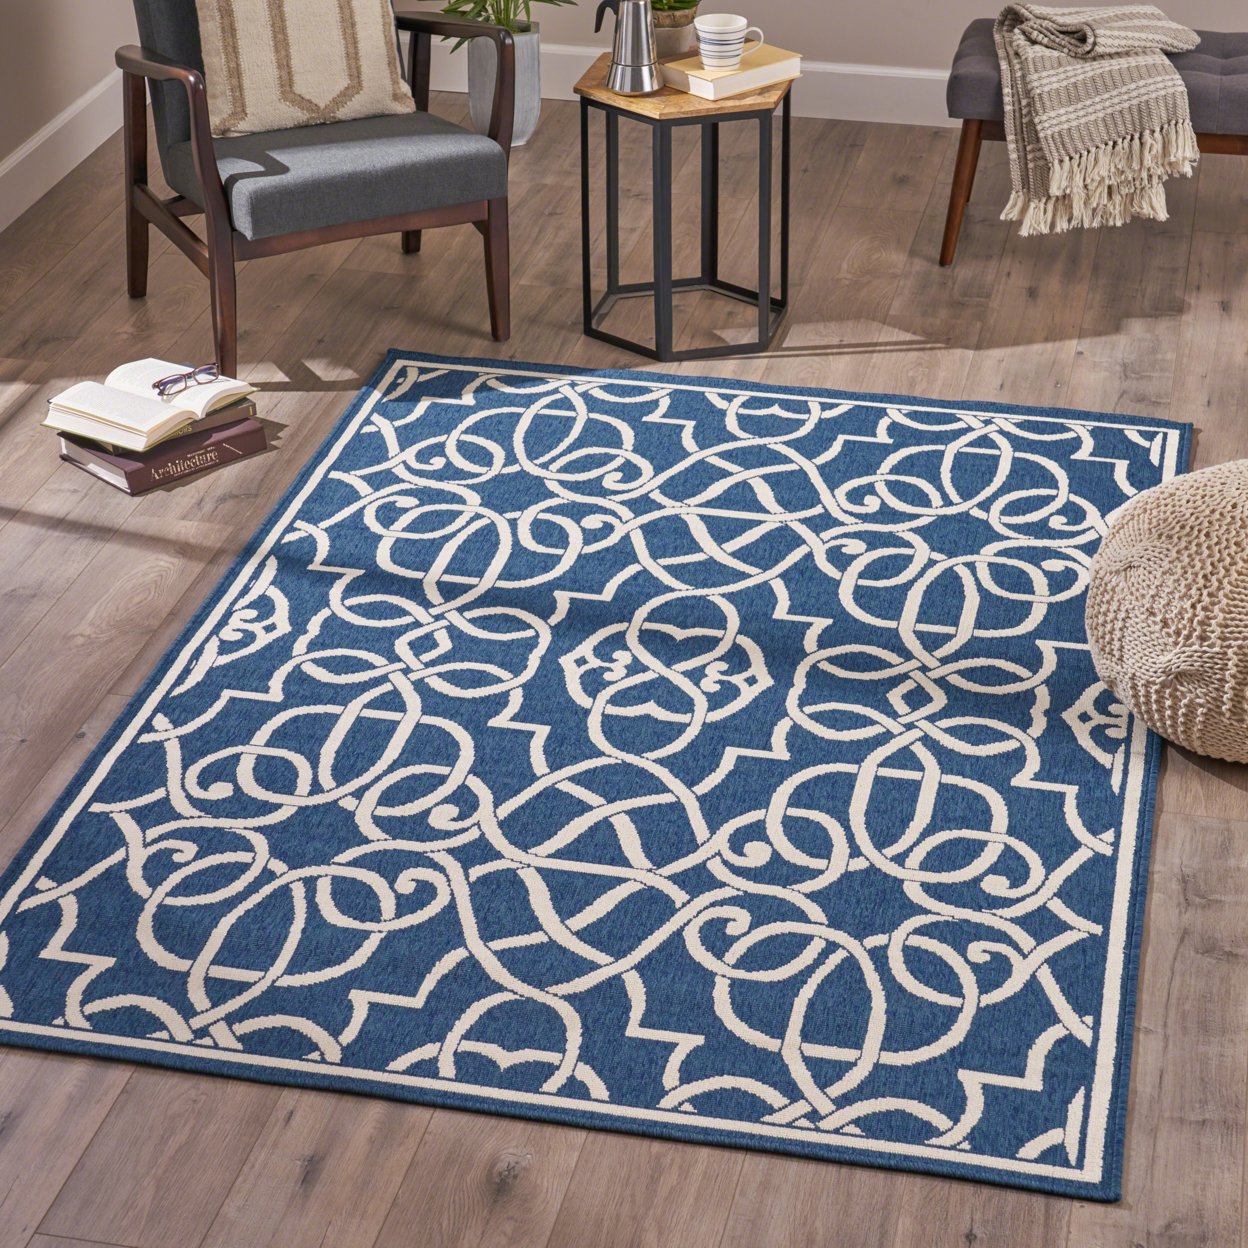 Alfonso Indoor Geometric Area Rug, Navy And Ivory - Navy + Ivory, 8' X 11'